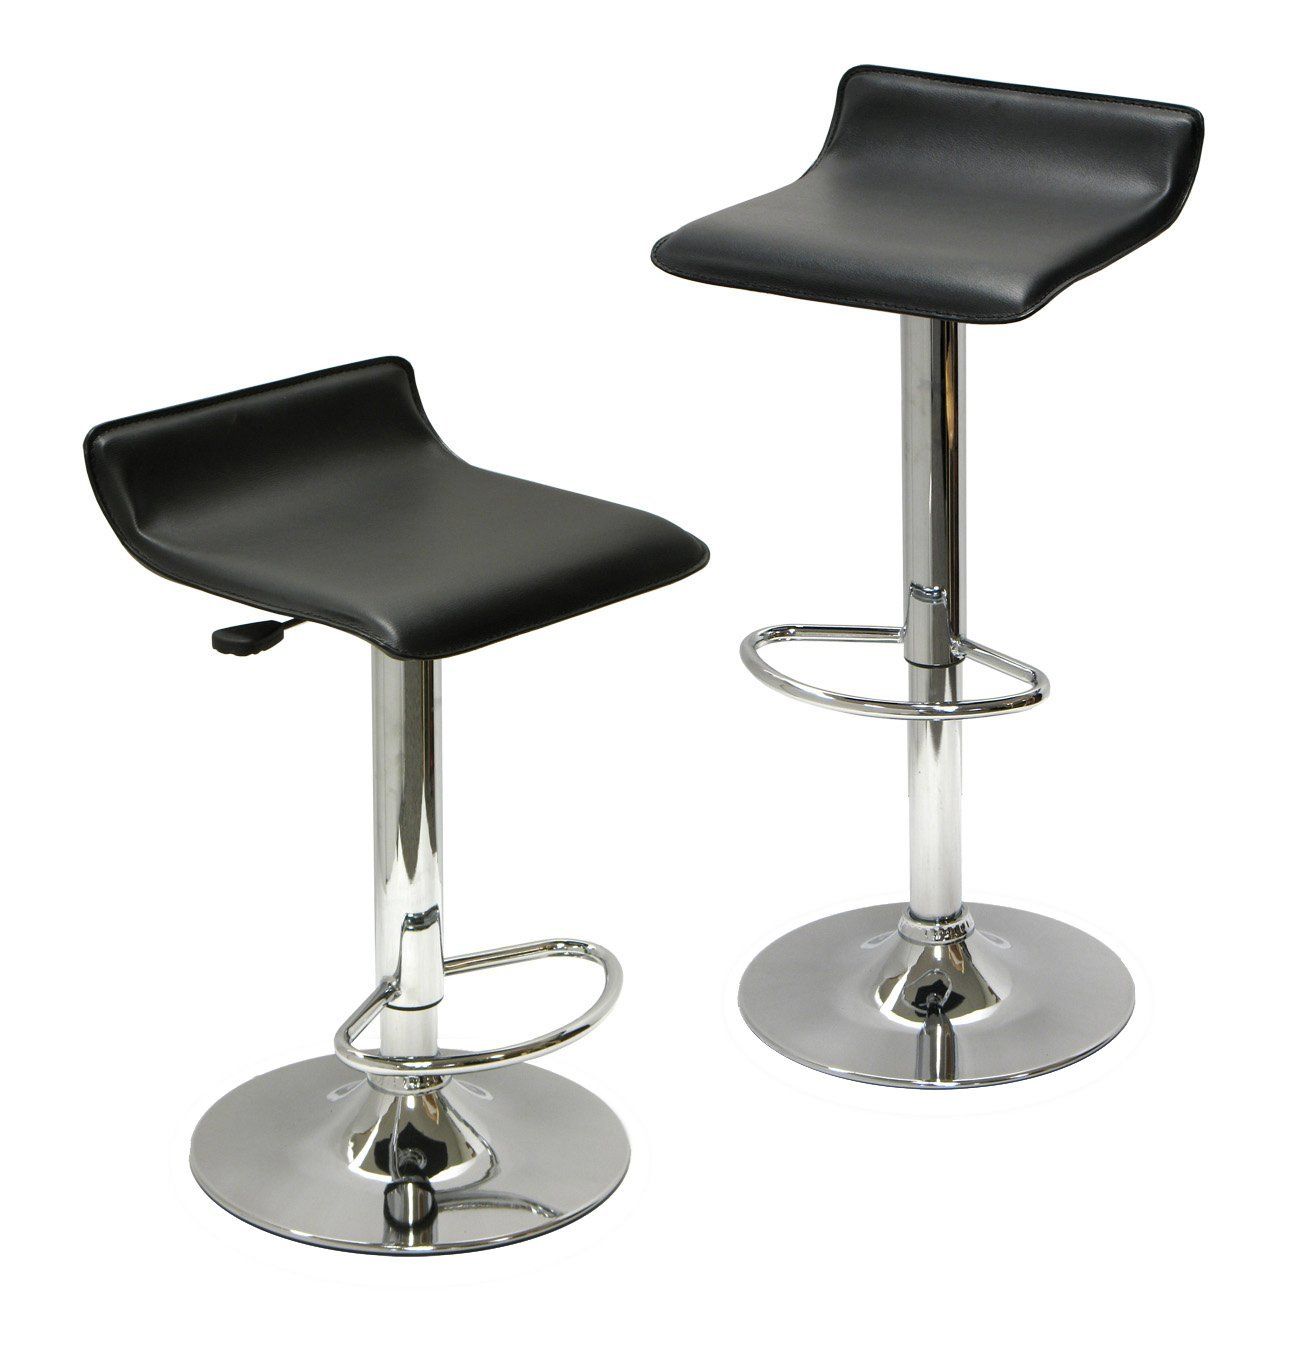 Winsome Wood Air Lift Adjustable Stools